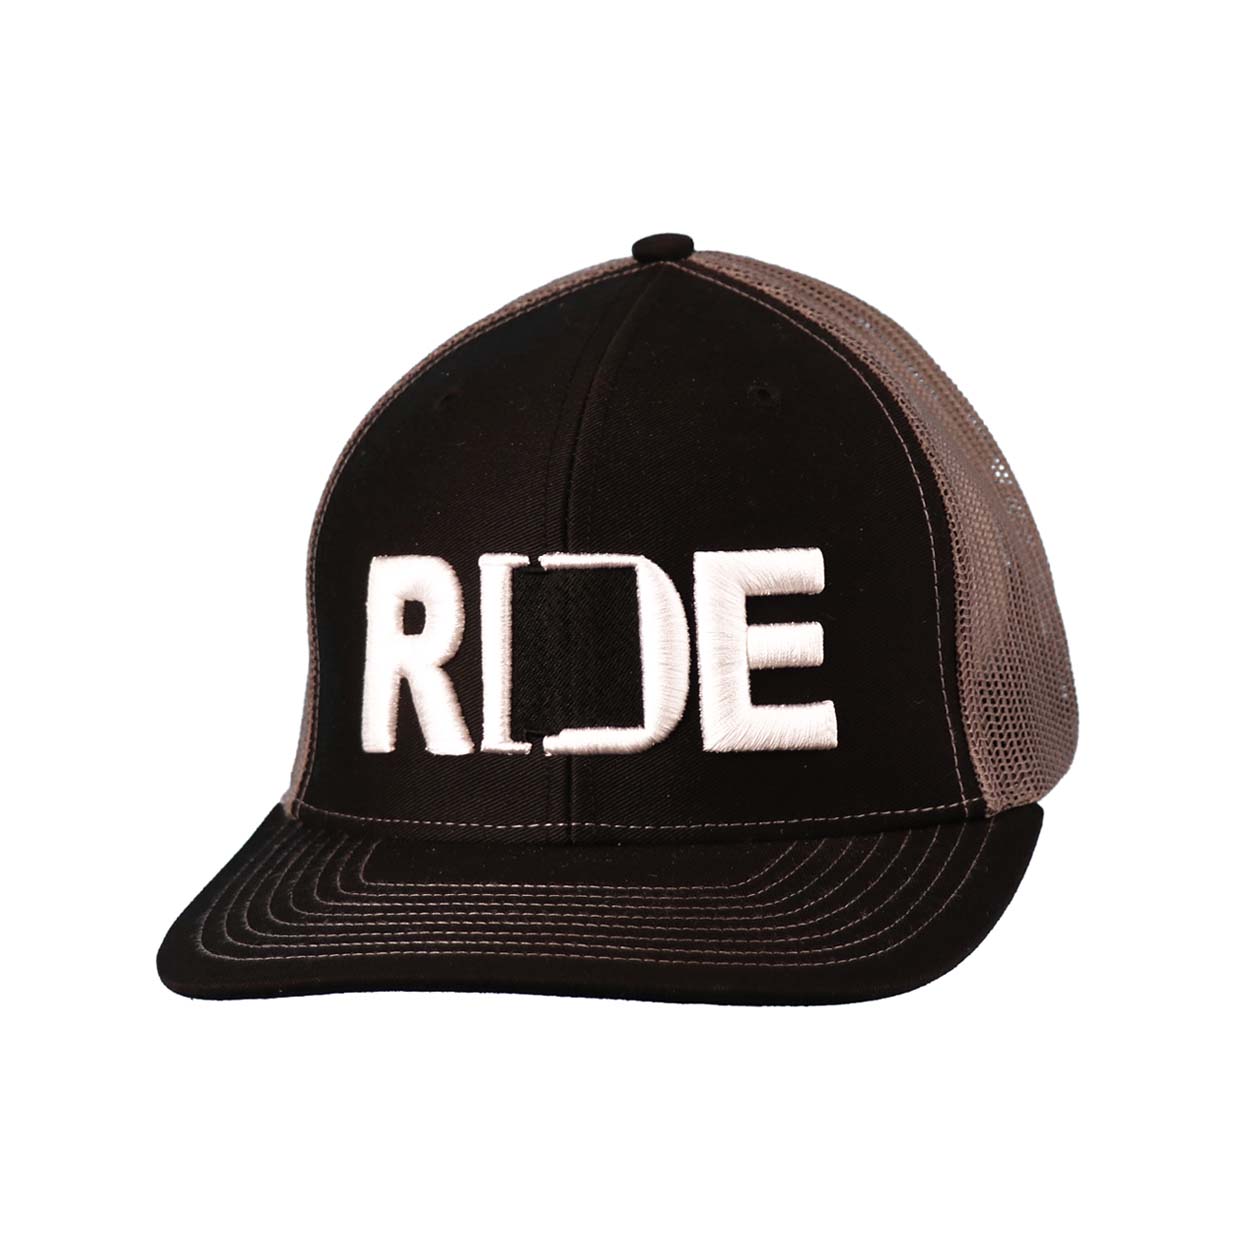 Ride New Mexico Classic Embroidered Snapback Trucker Hat Black/Gray